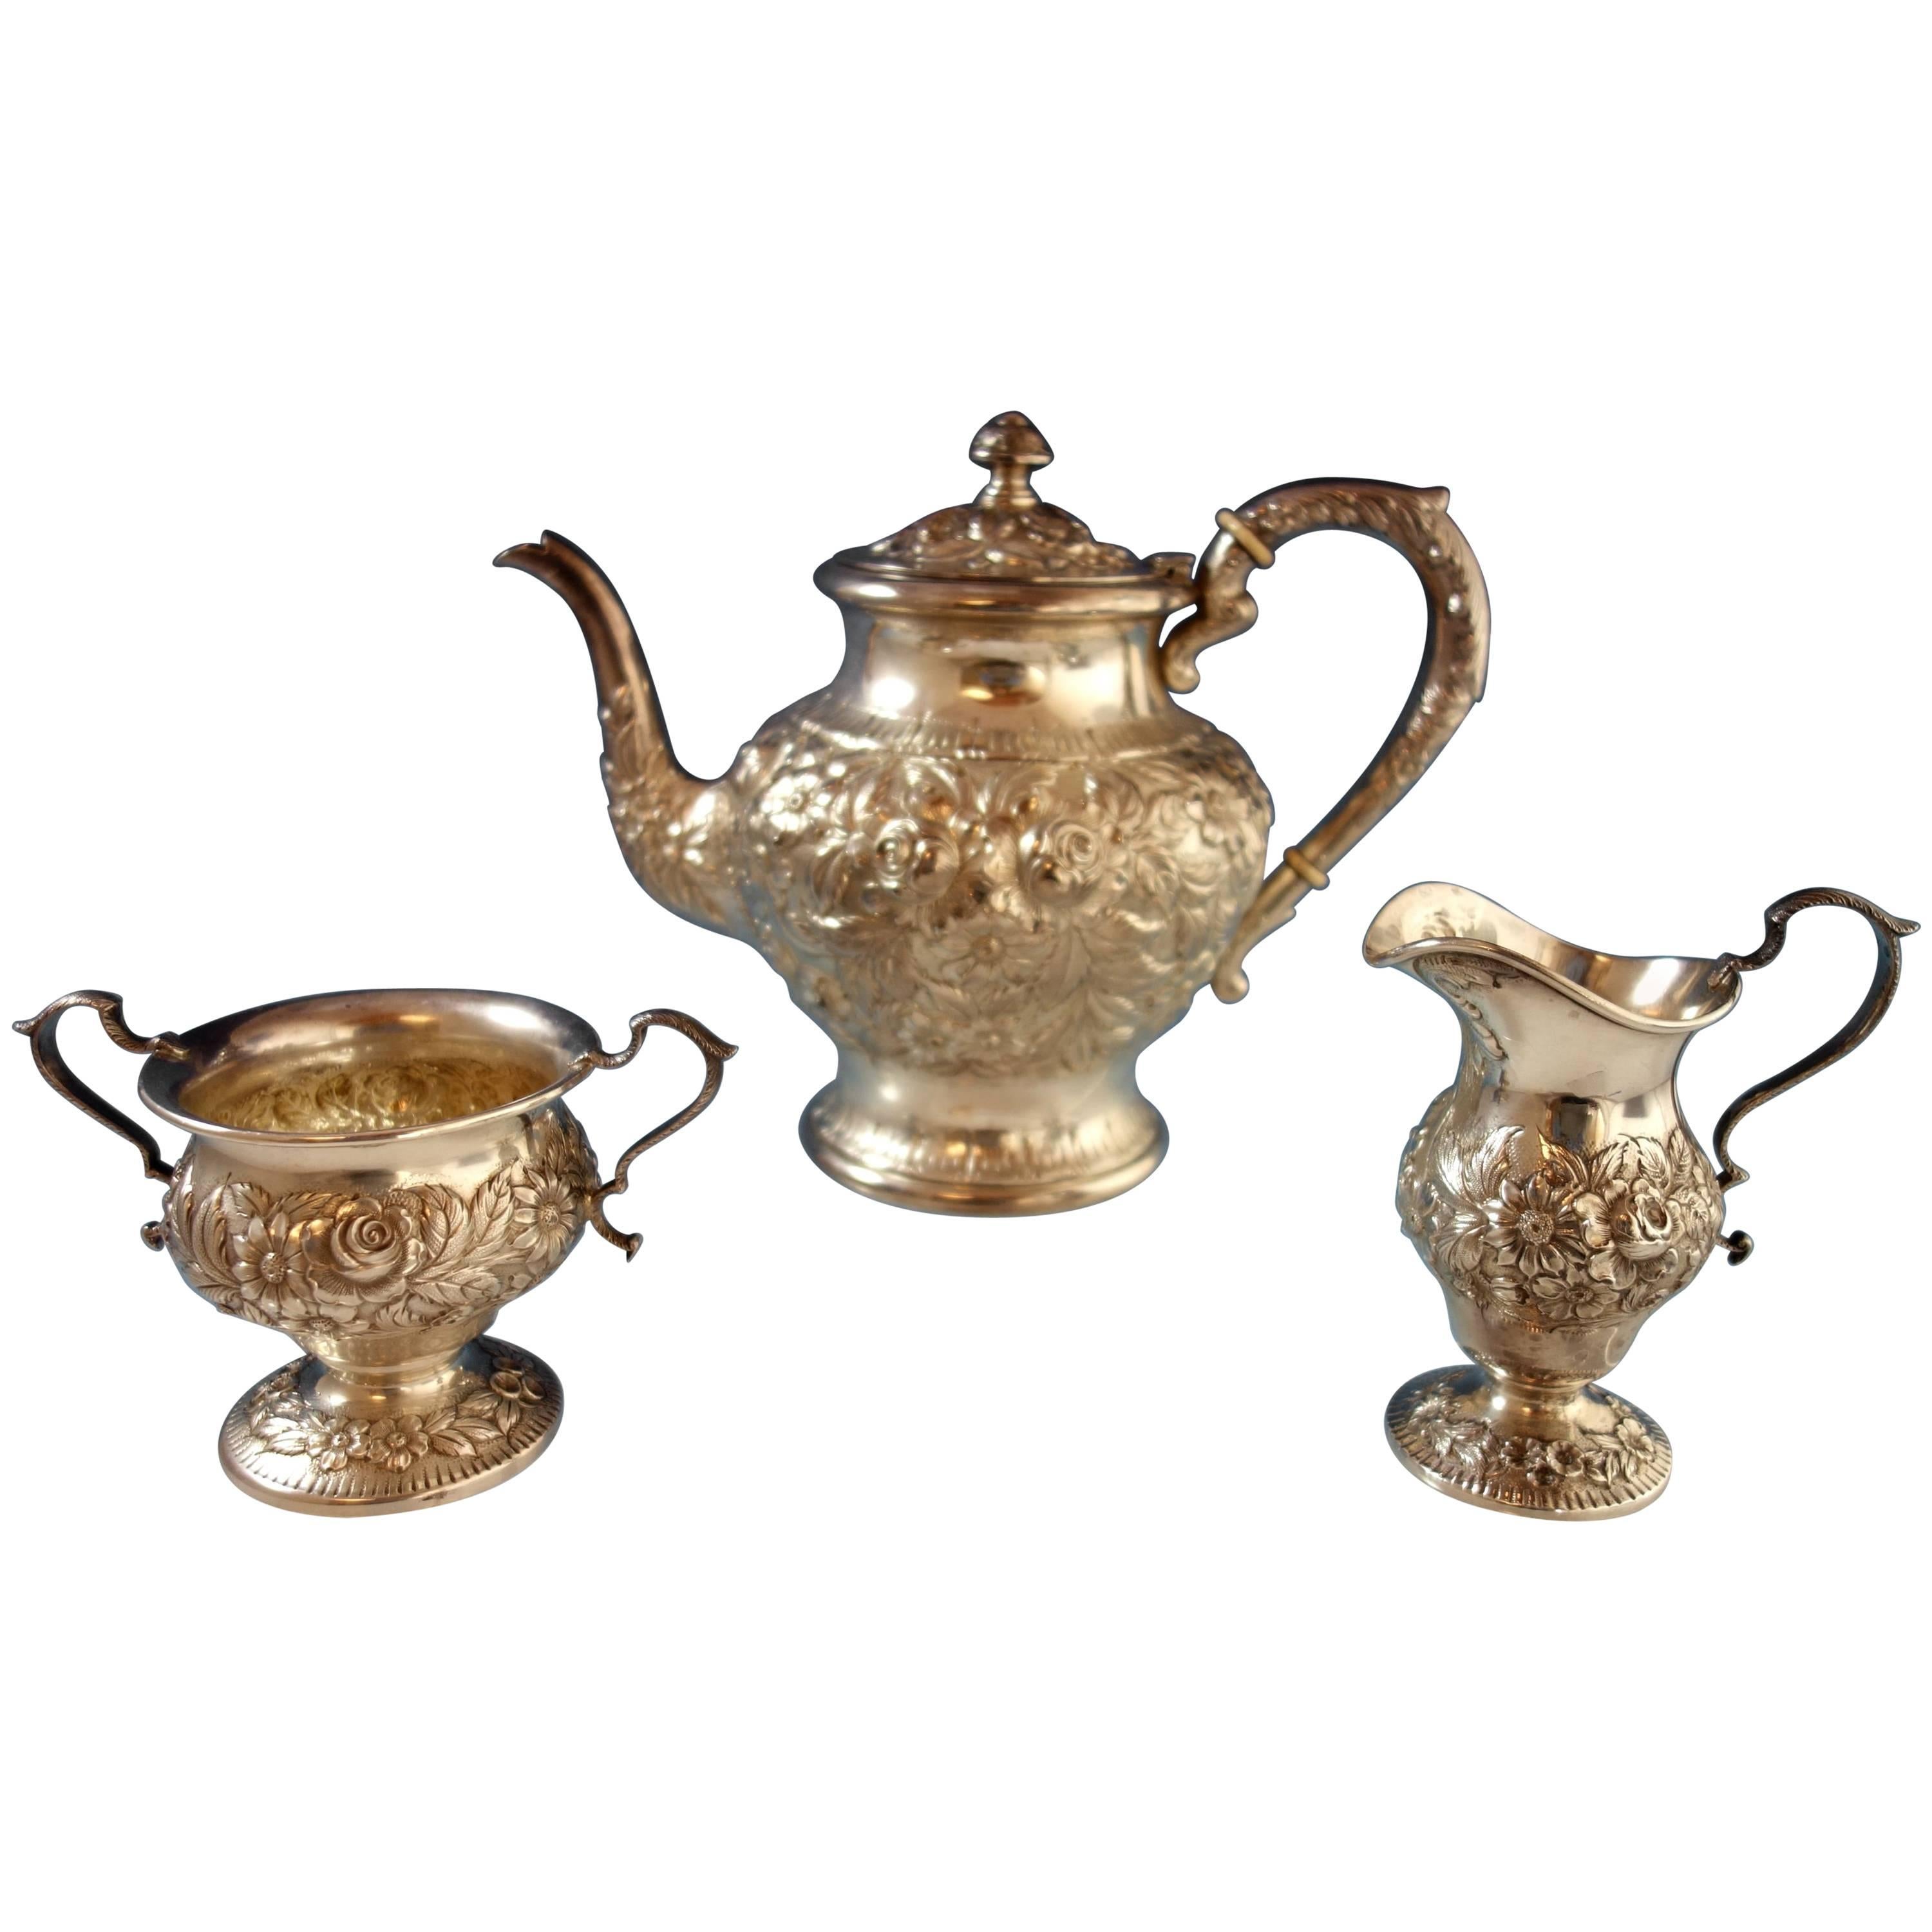 Repousse by Kirk Sterling Silver Tea Set Three-Piece #184AF Hollowware